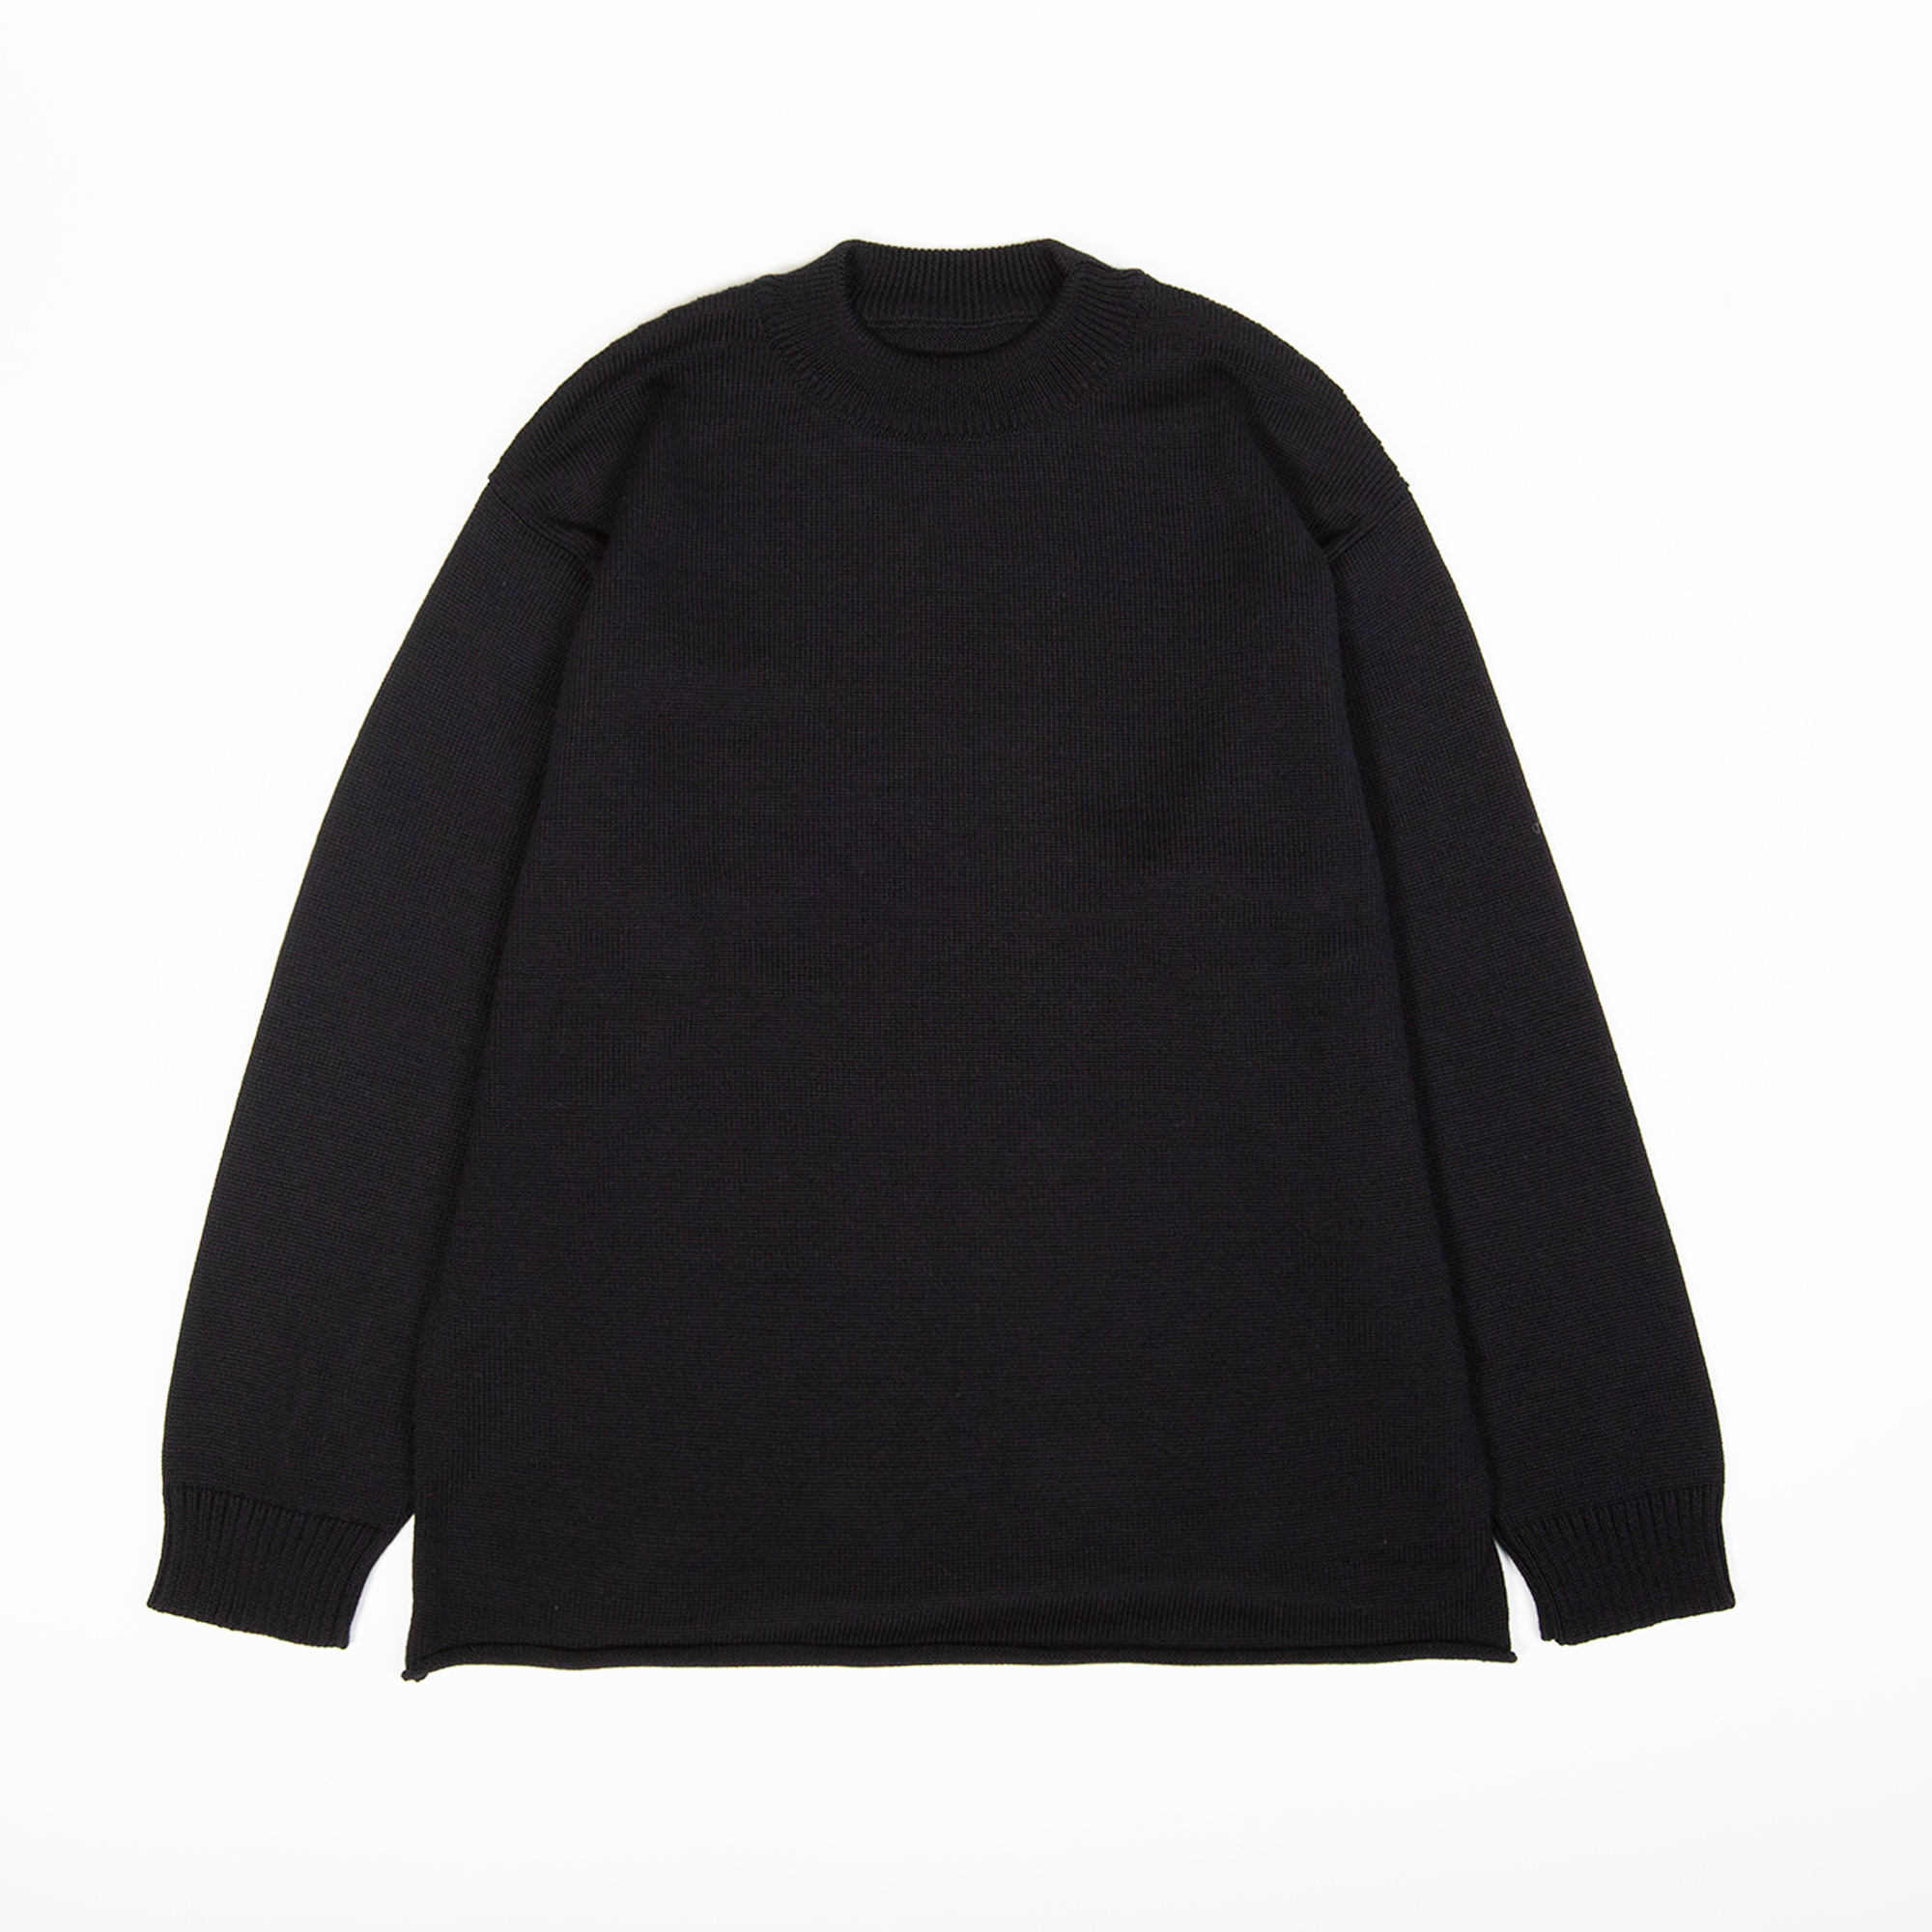 DYCE sweater in Black color by Arpenteur